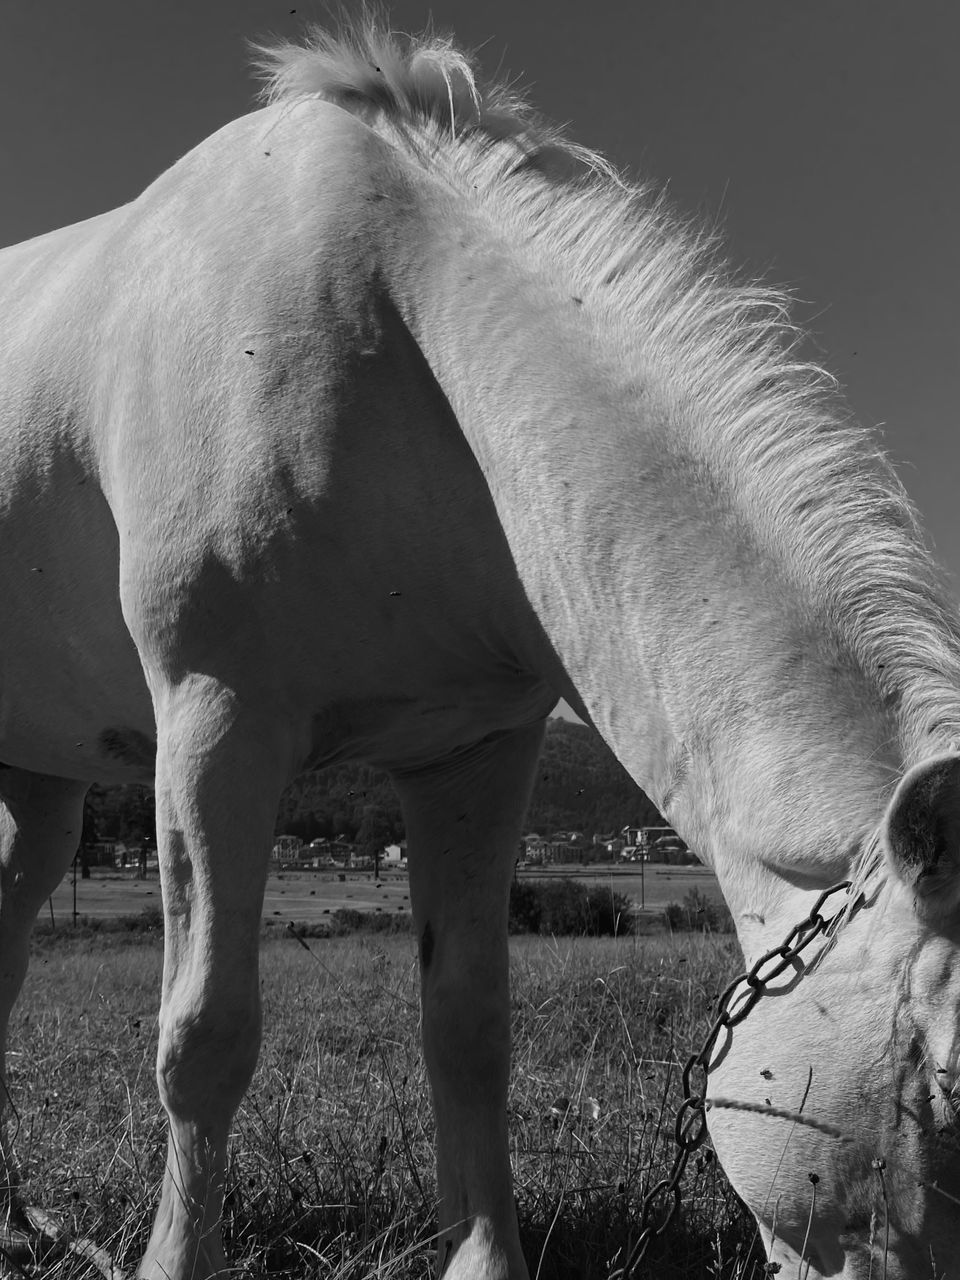 animal themes, animal, horse, mammal, black and white, animal wildlife, monochrome, domestic animals, monochrome photography, white, one animal, livestock, mane, stallion, pet, nature, no people, mustang horse, animal body part, black, standing, day, field, wildlife, land, grass, outdoors, agriculture, working animal, mare, plant, herbivorous